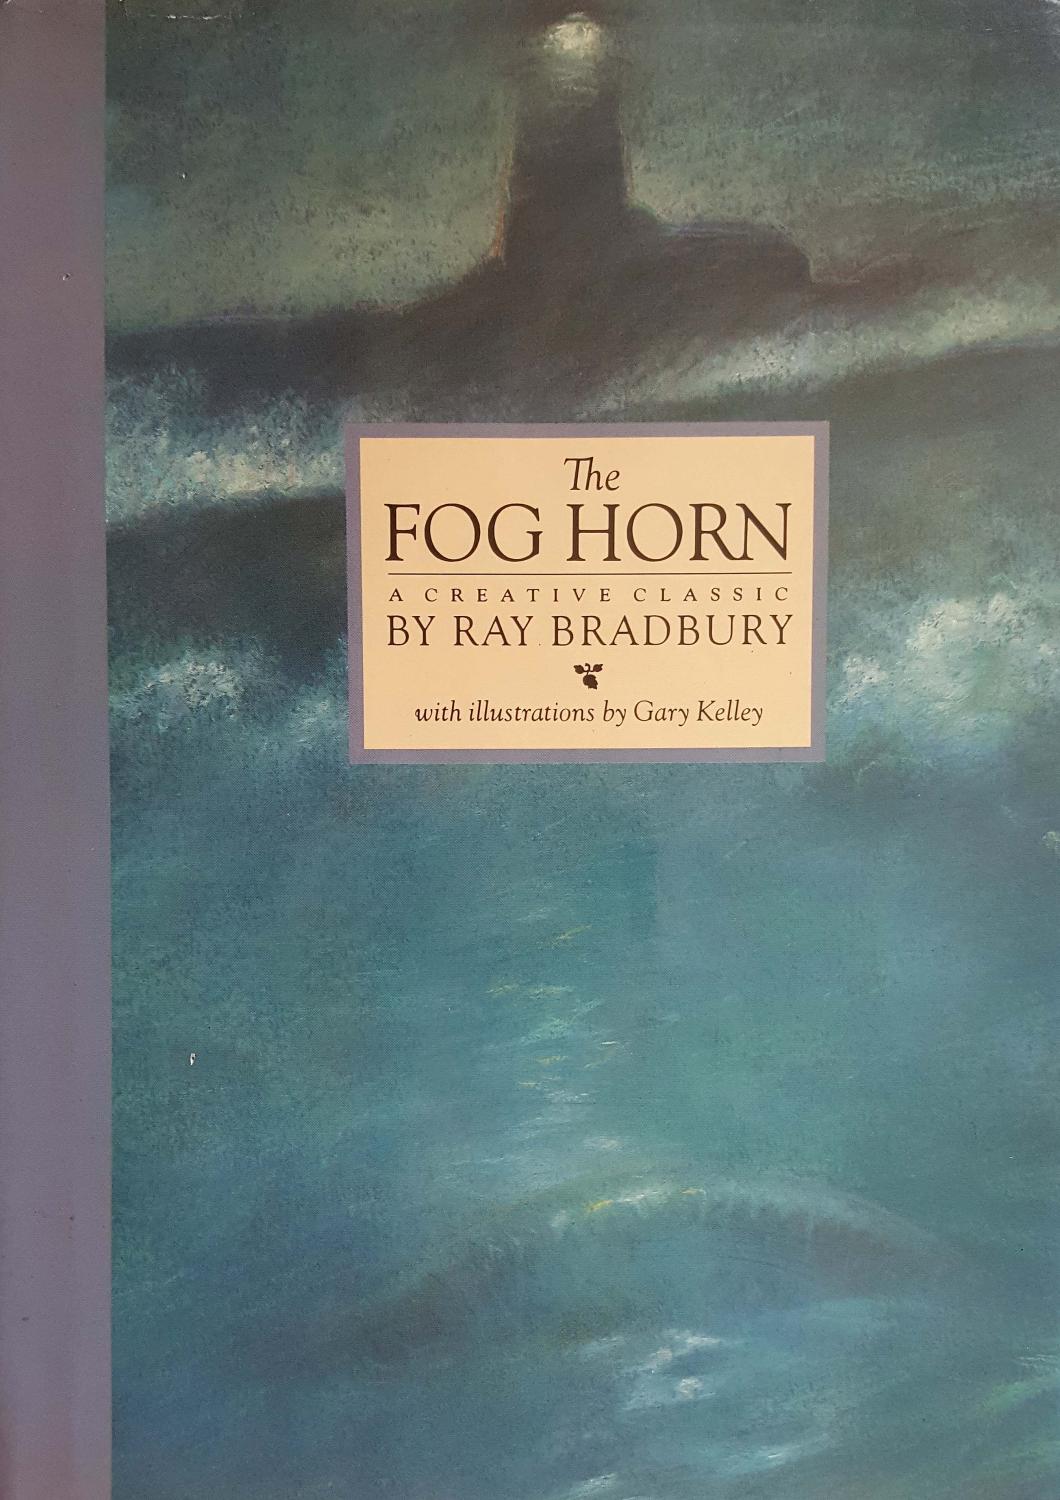 The Fog Horn & Other Stories by Ray Bradbury